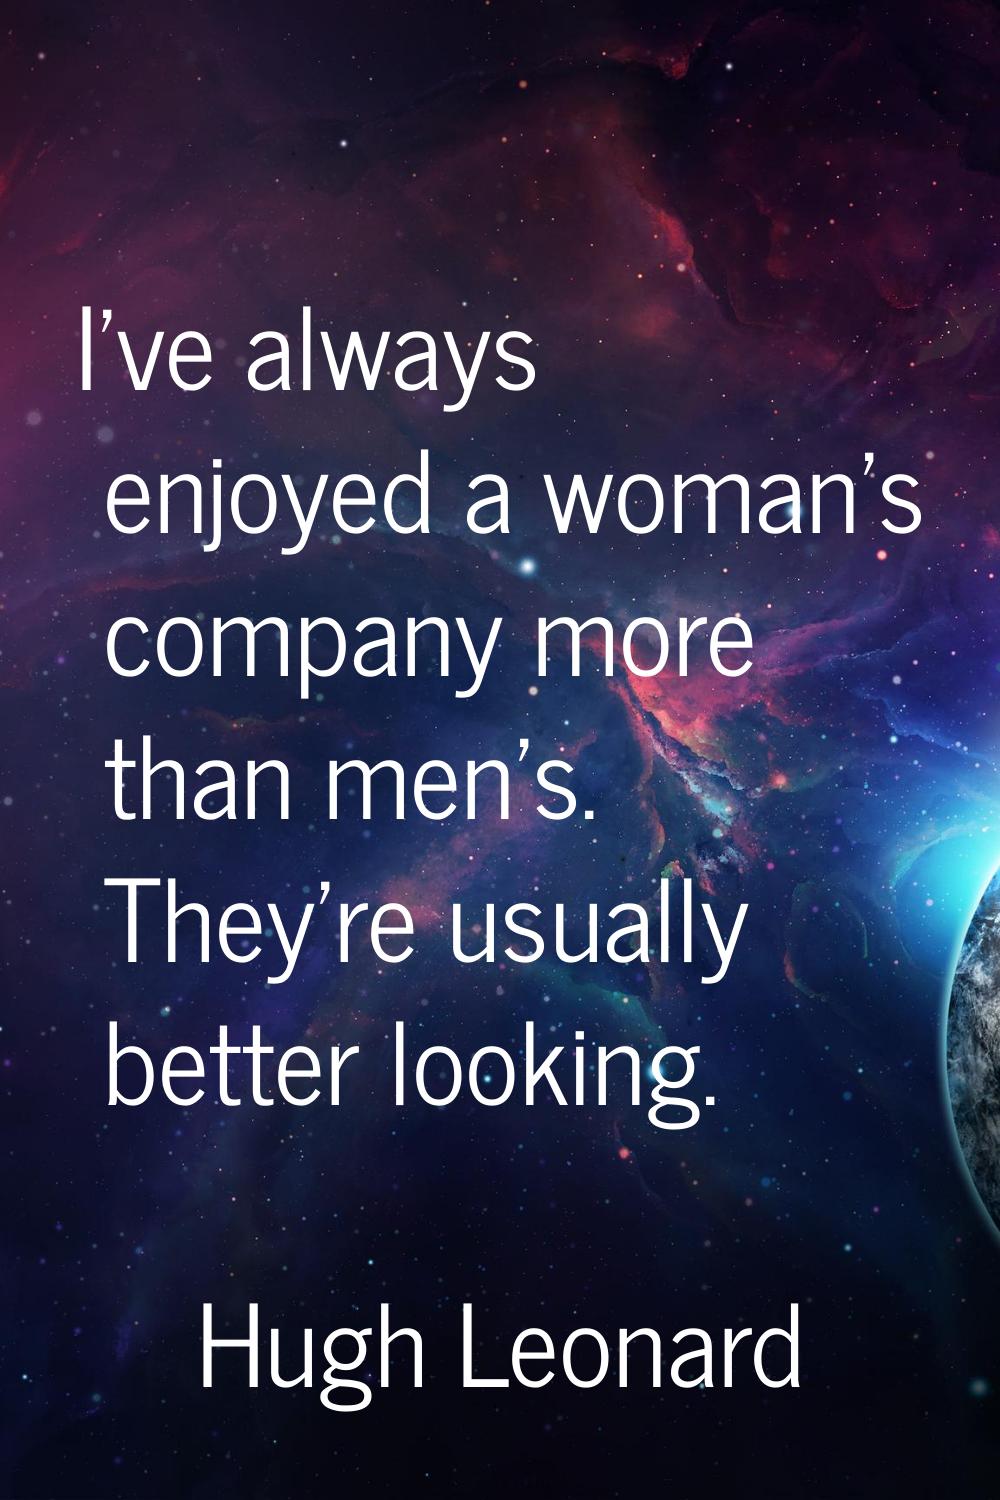 I've always enjoyed a woman's company more than men's. They're usually better looking.